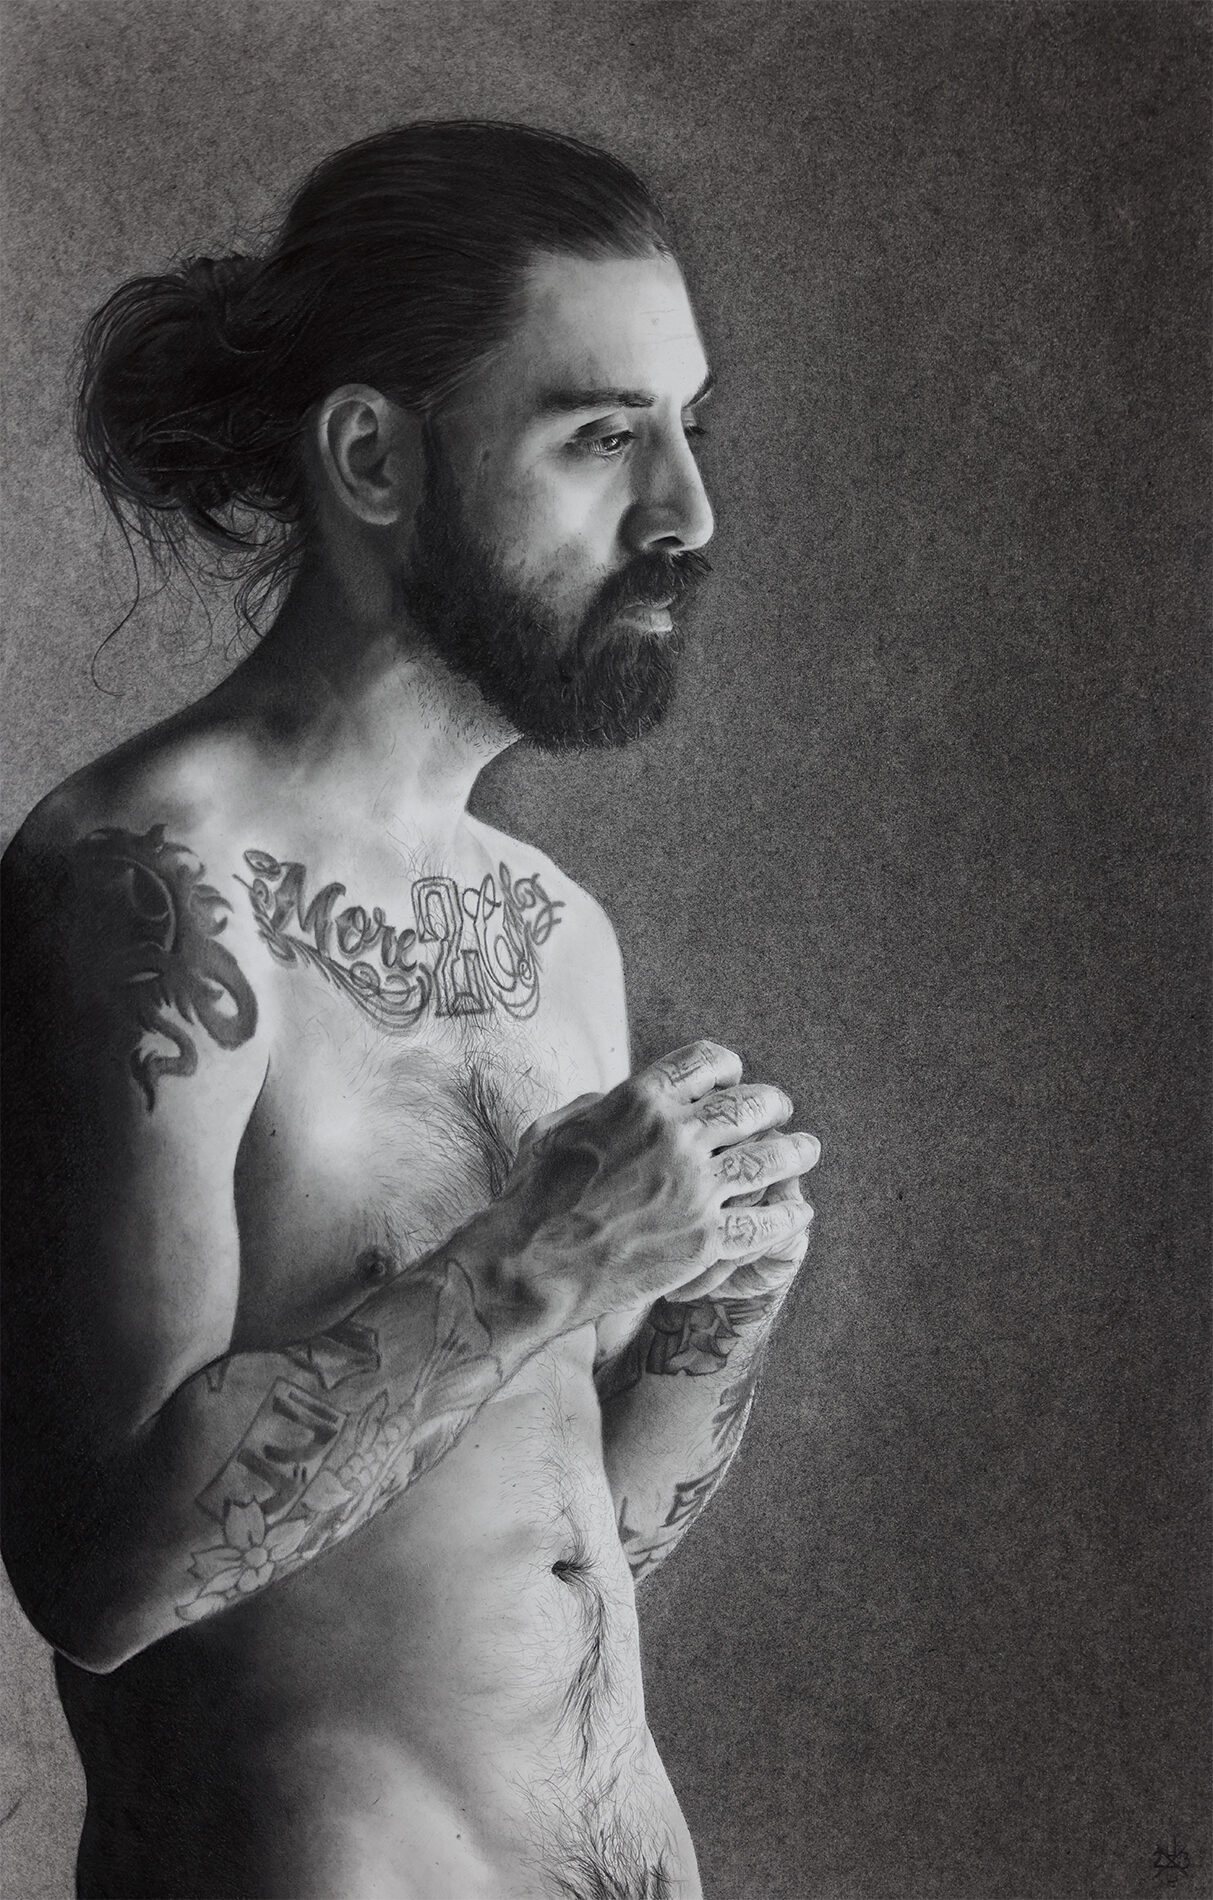 Black and white: nude man from the hips up. He has tattoos across his arms, which are loosely clasped near his also-tatooed chest, and he has a beard and long hair in a bun..